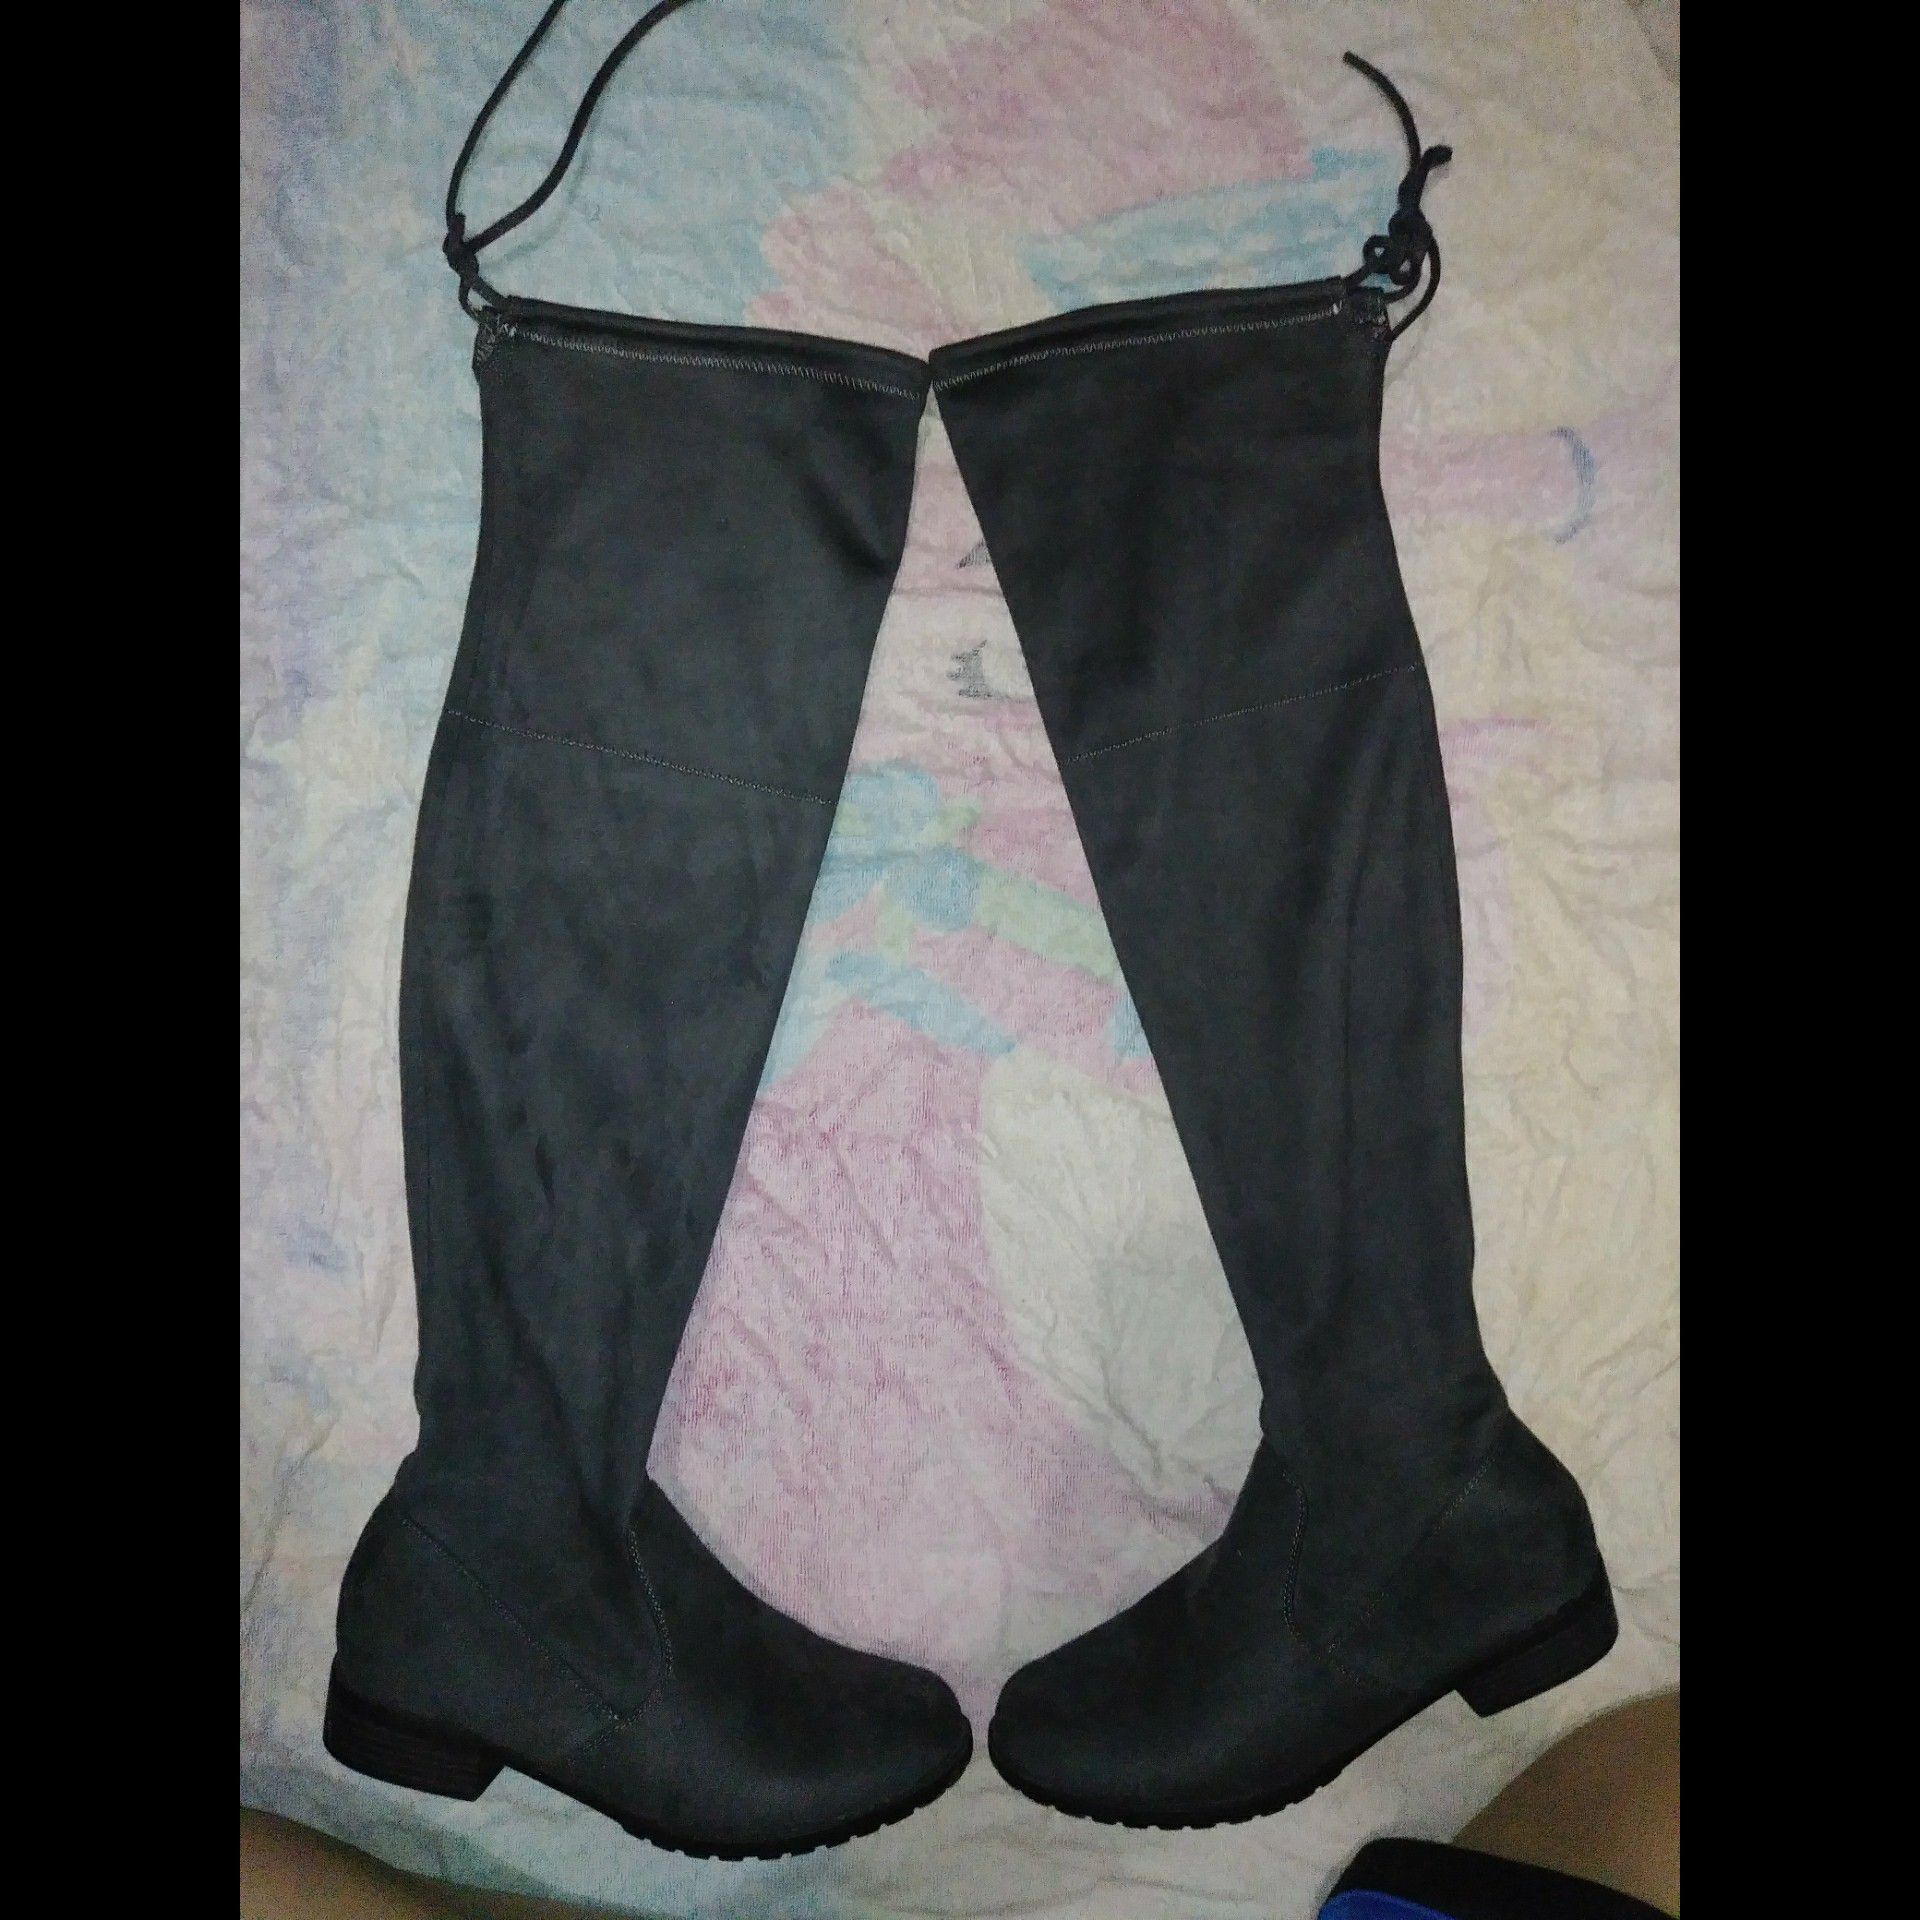 Thigh high boots grey size 7.5